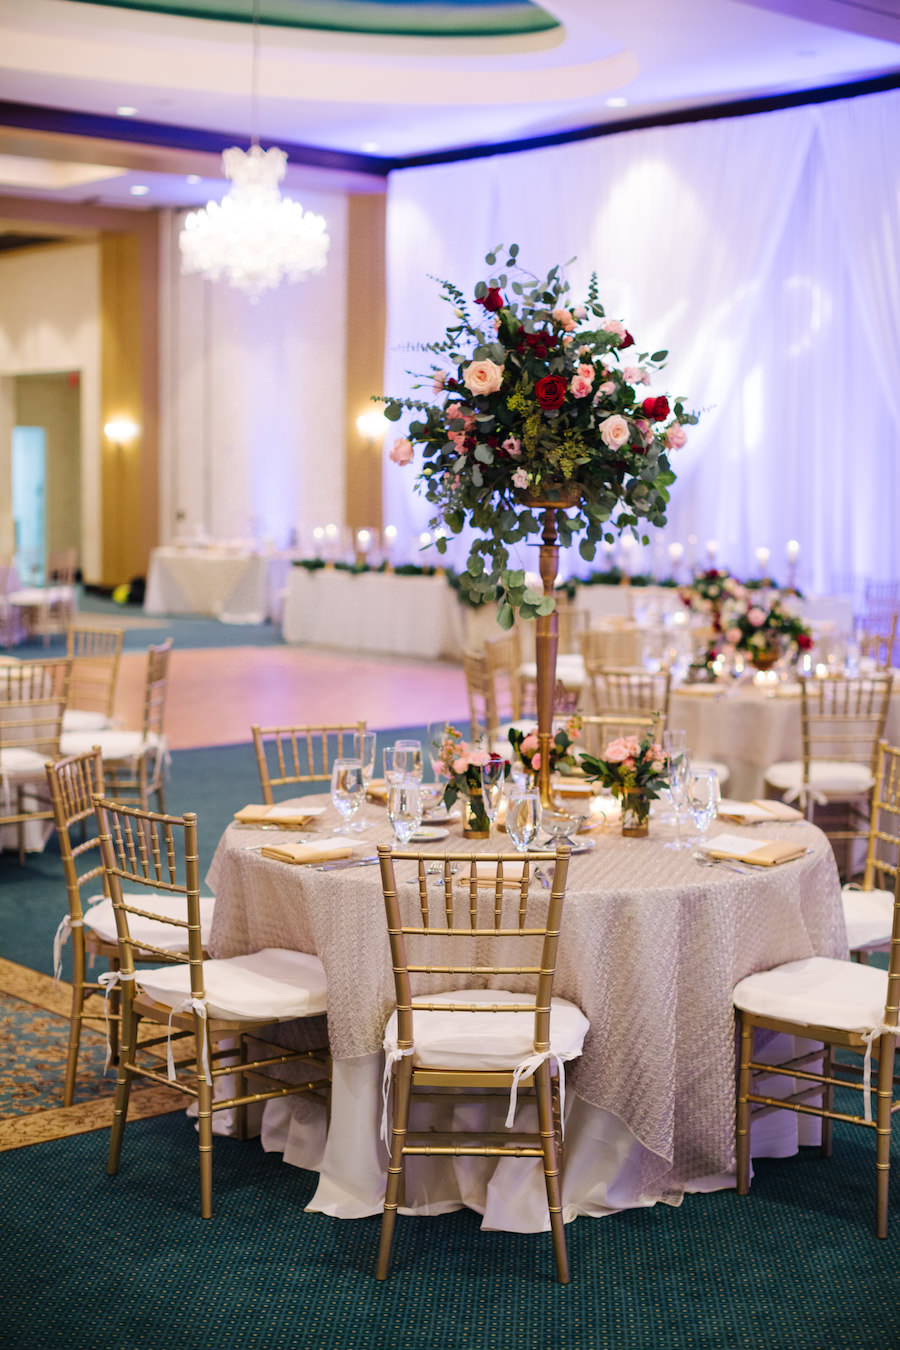 Elegant Ivory and Gray Reception Decor at Tampa Bay Wedding Venue The Palmetto Club with Tall Centerpiece with Blush and Red Roses and Greenery, and Gold Chiavari Chairs